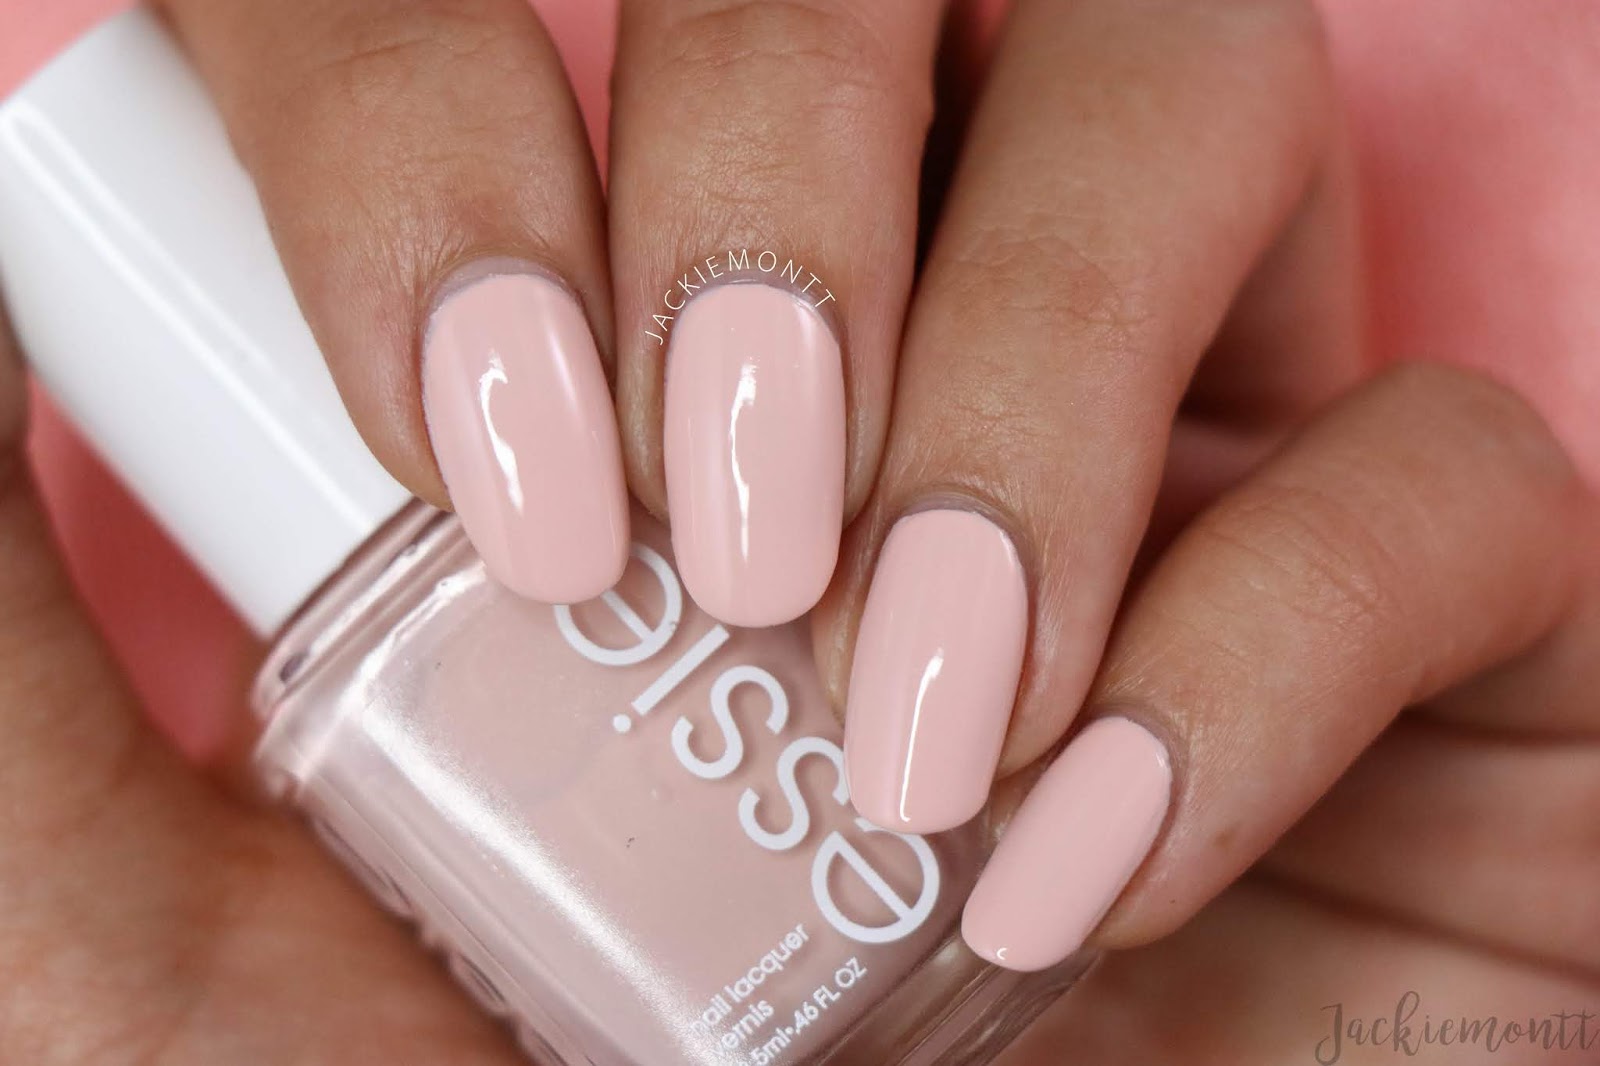 6. Essie Spring Nail Polish Swatches - wide 4